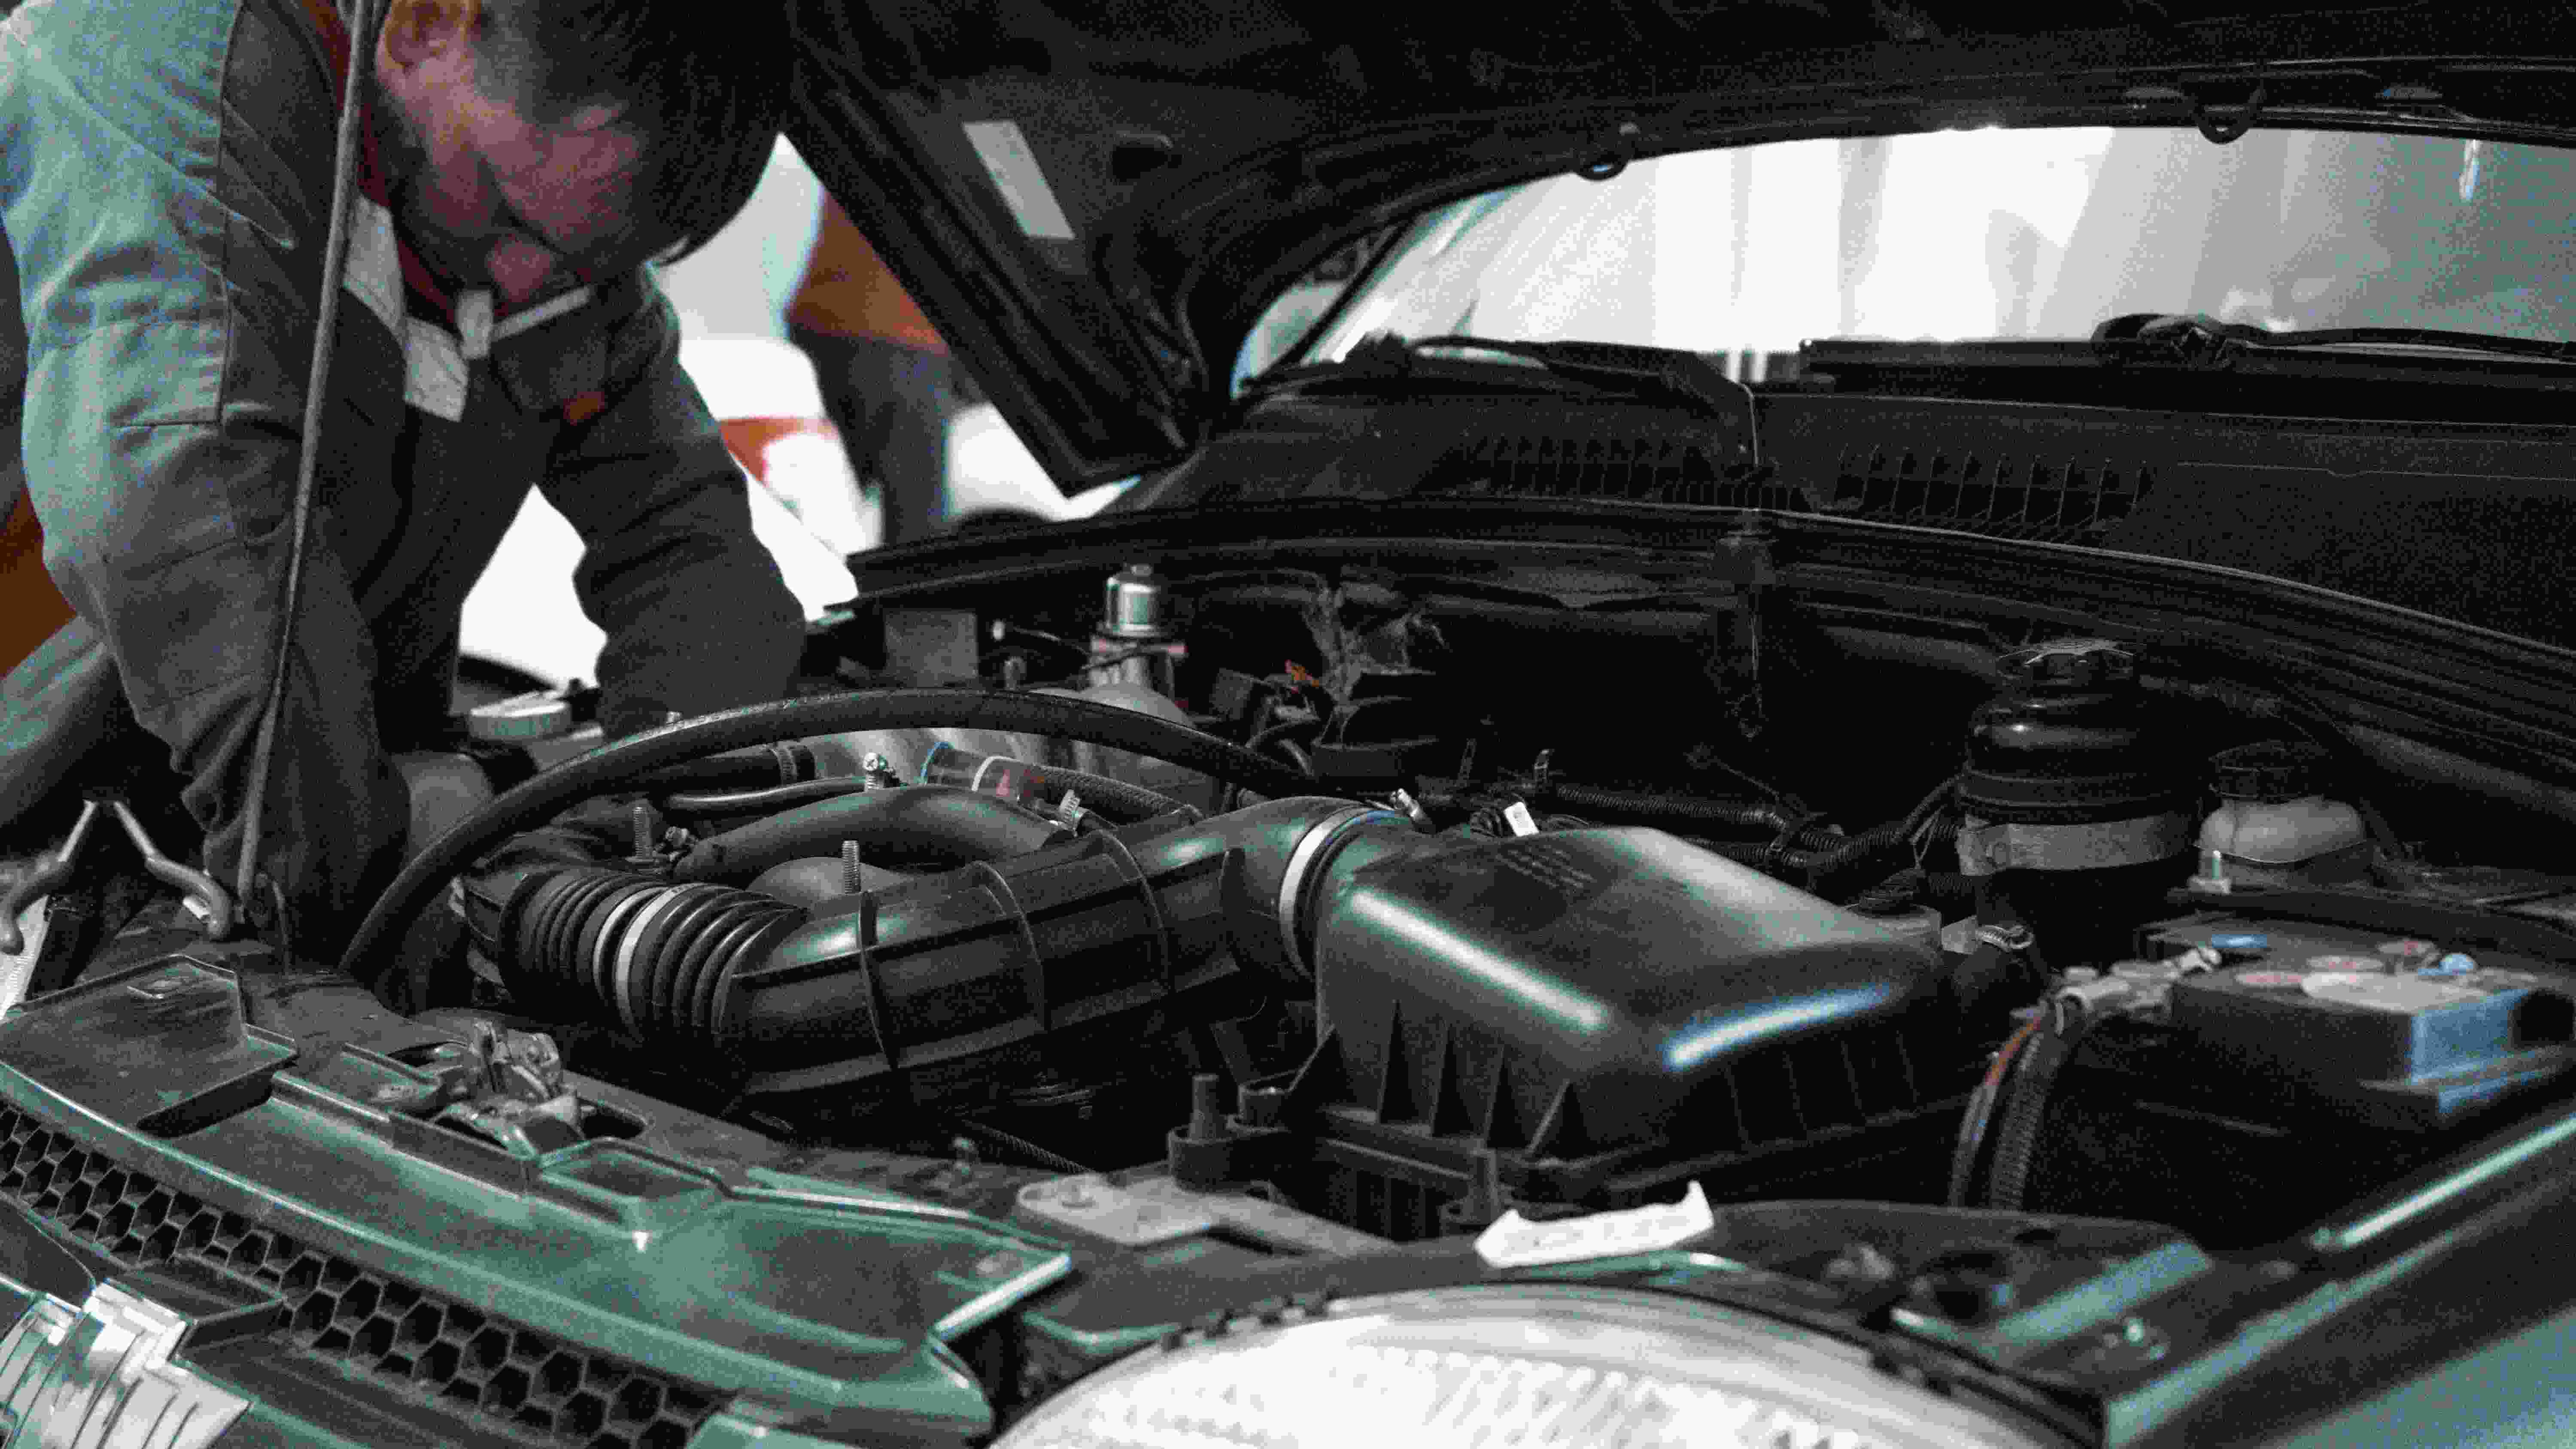 A mechanic works under the hood of a car